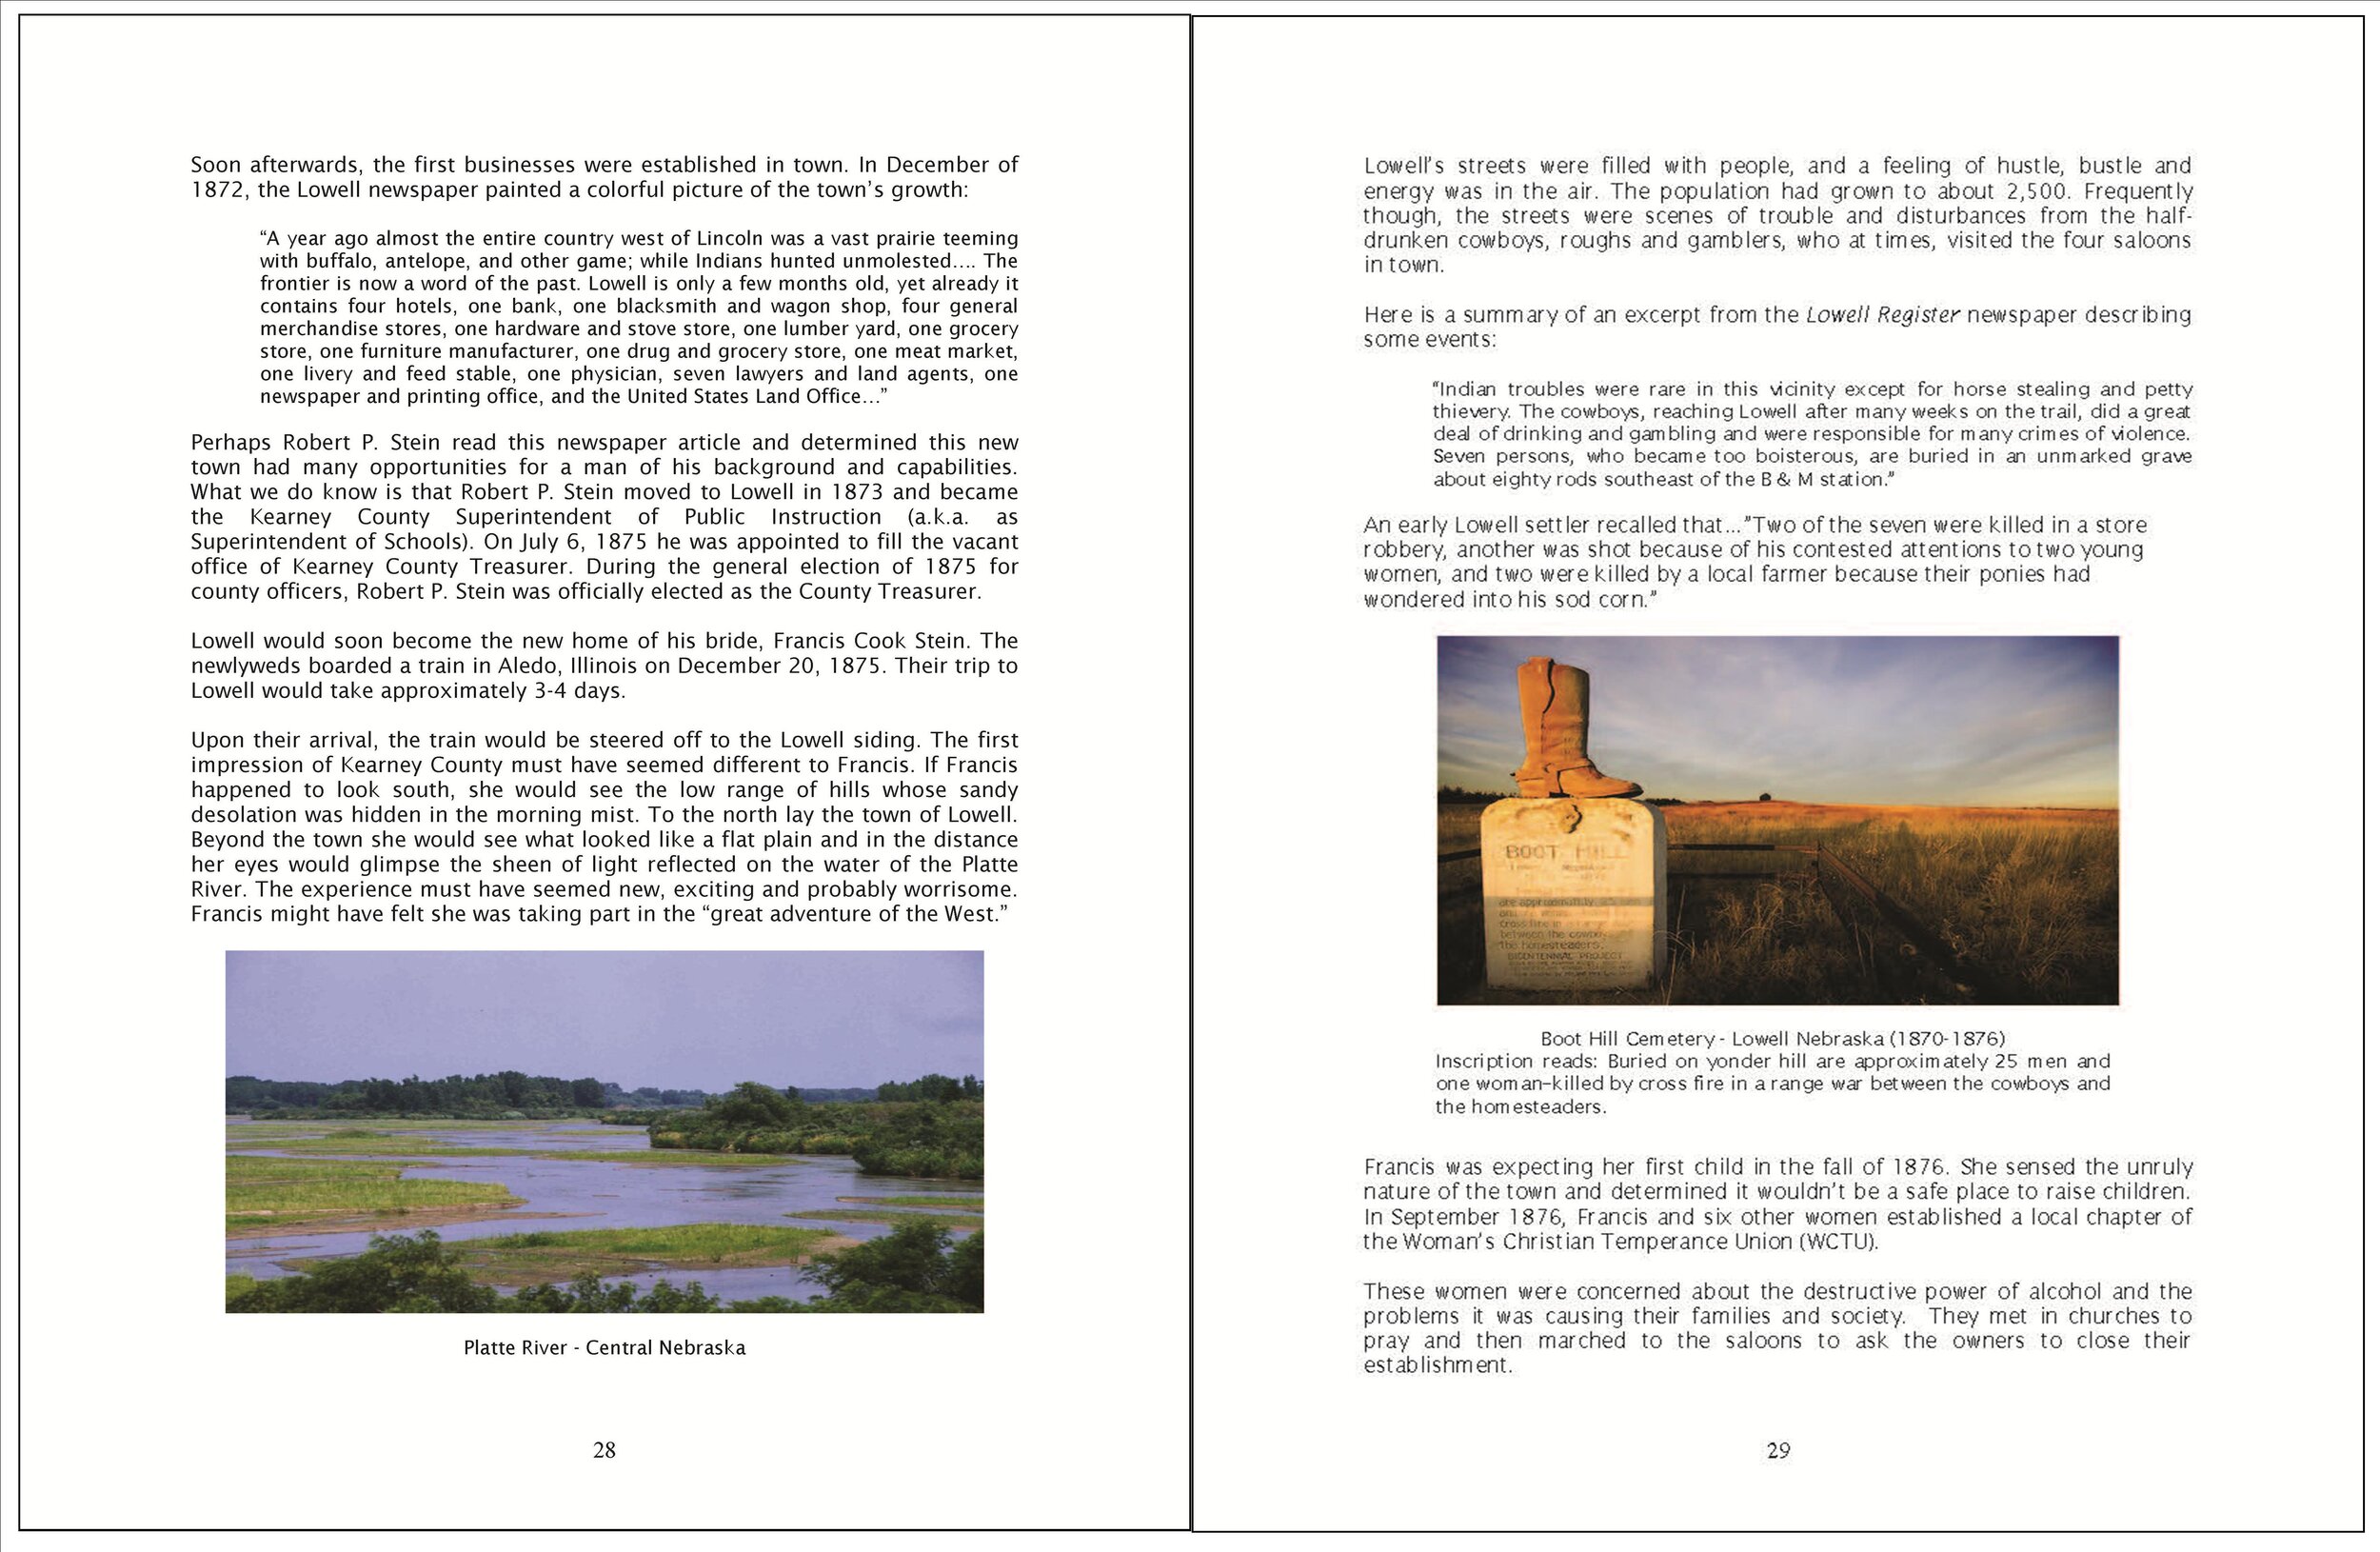 Pages 28 & 29.jpg